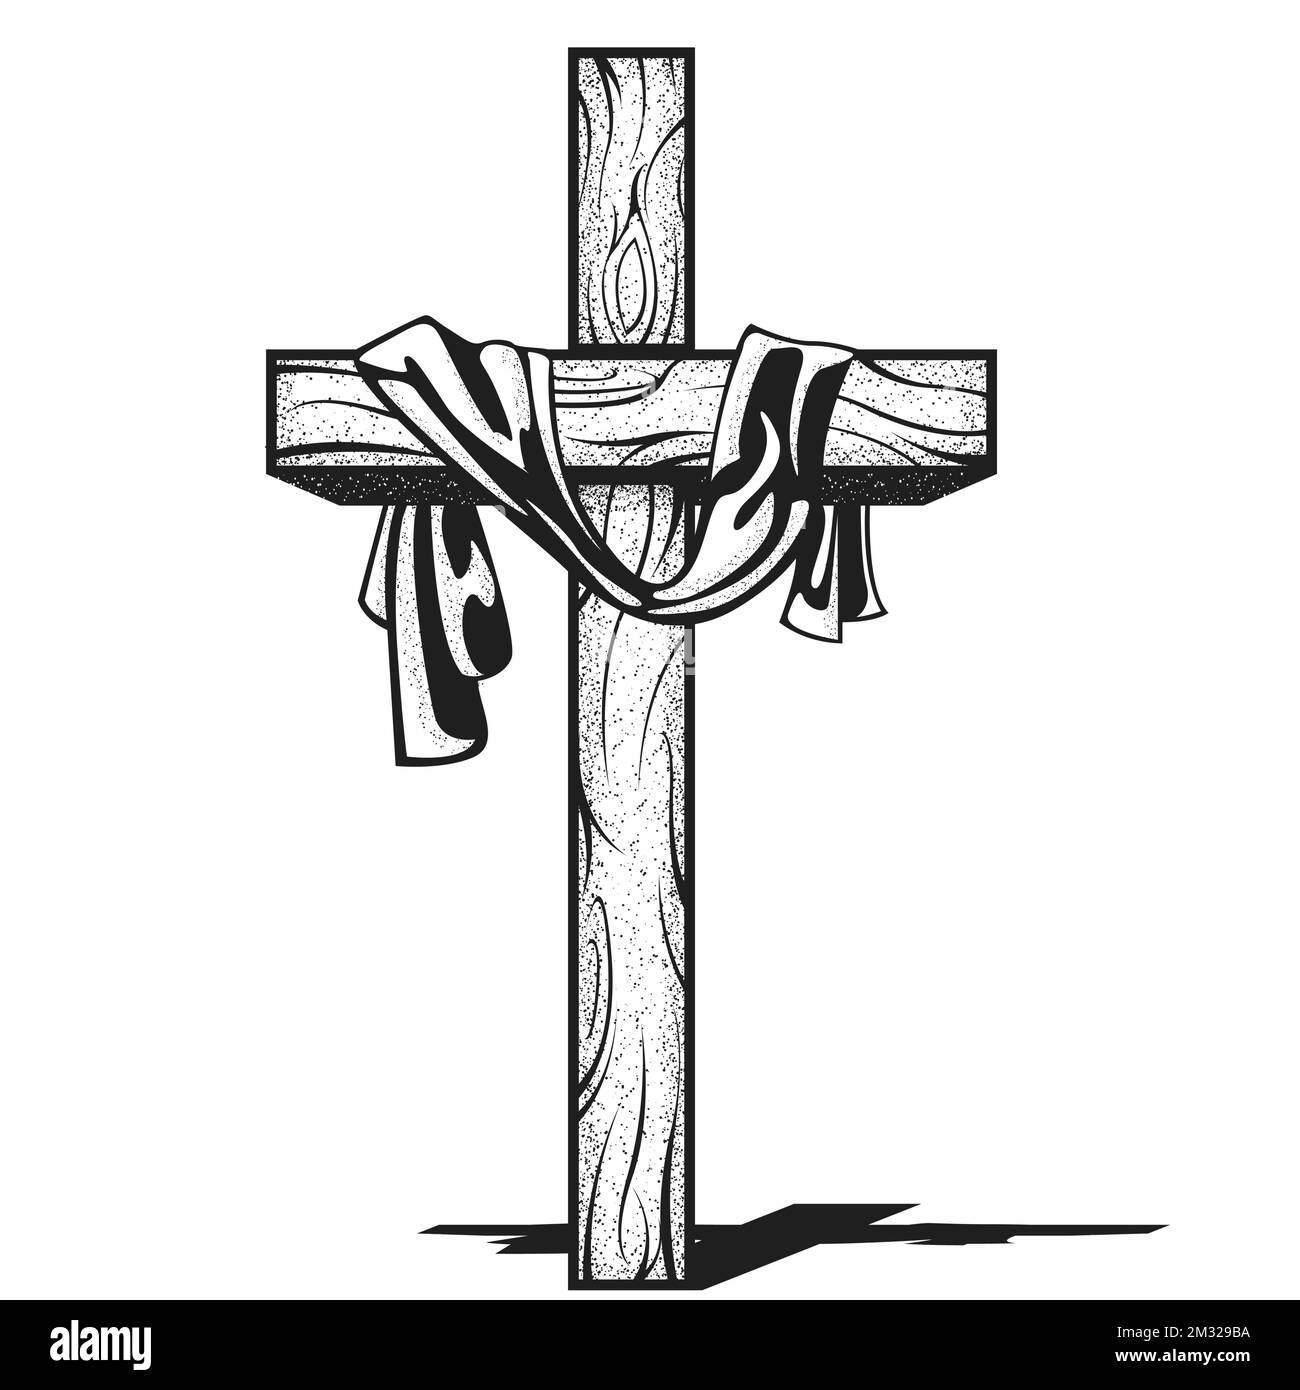 Cross with canvas, crucifix with hanging down fabric, resurrection after crucifixion of Jesus, christianity symbol, vector Stock Vector